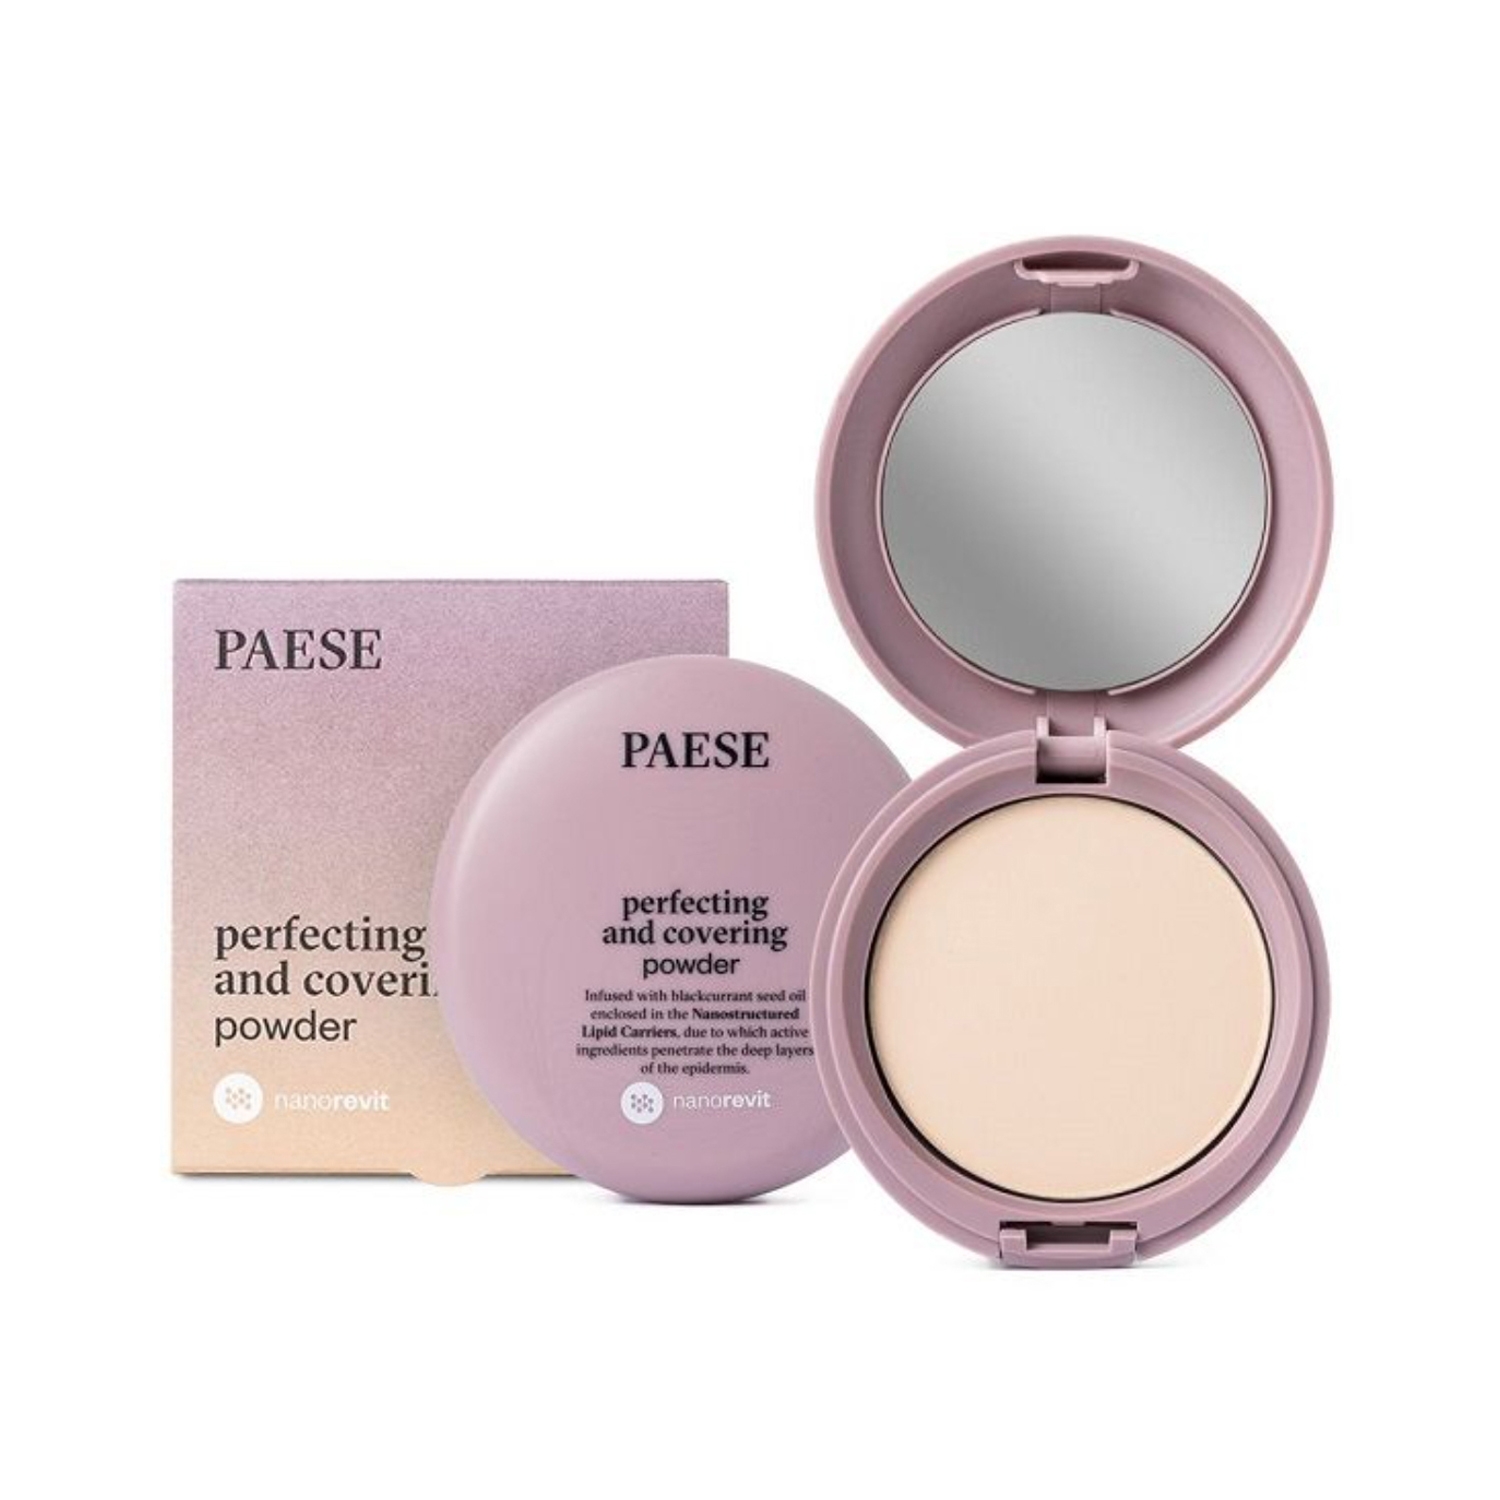 Paese Cosmetics | Paese Cosmetics Perfecting and Covering Powder - No 02 Porcelain (9g)